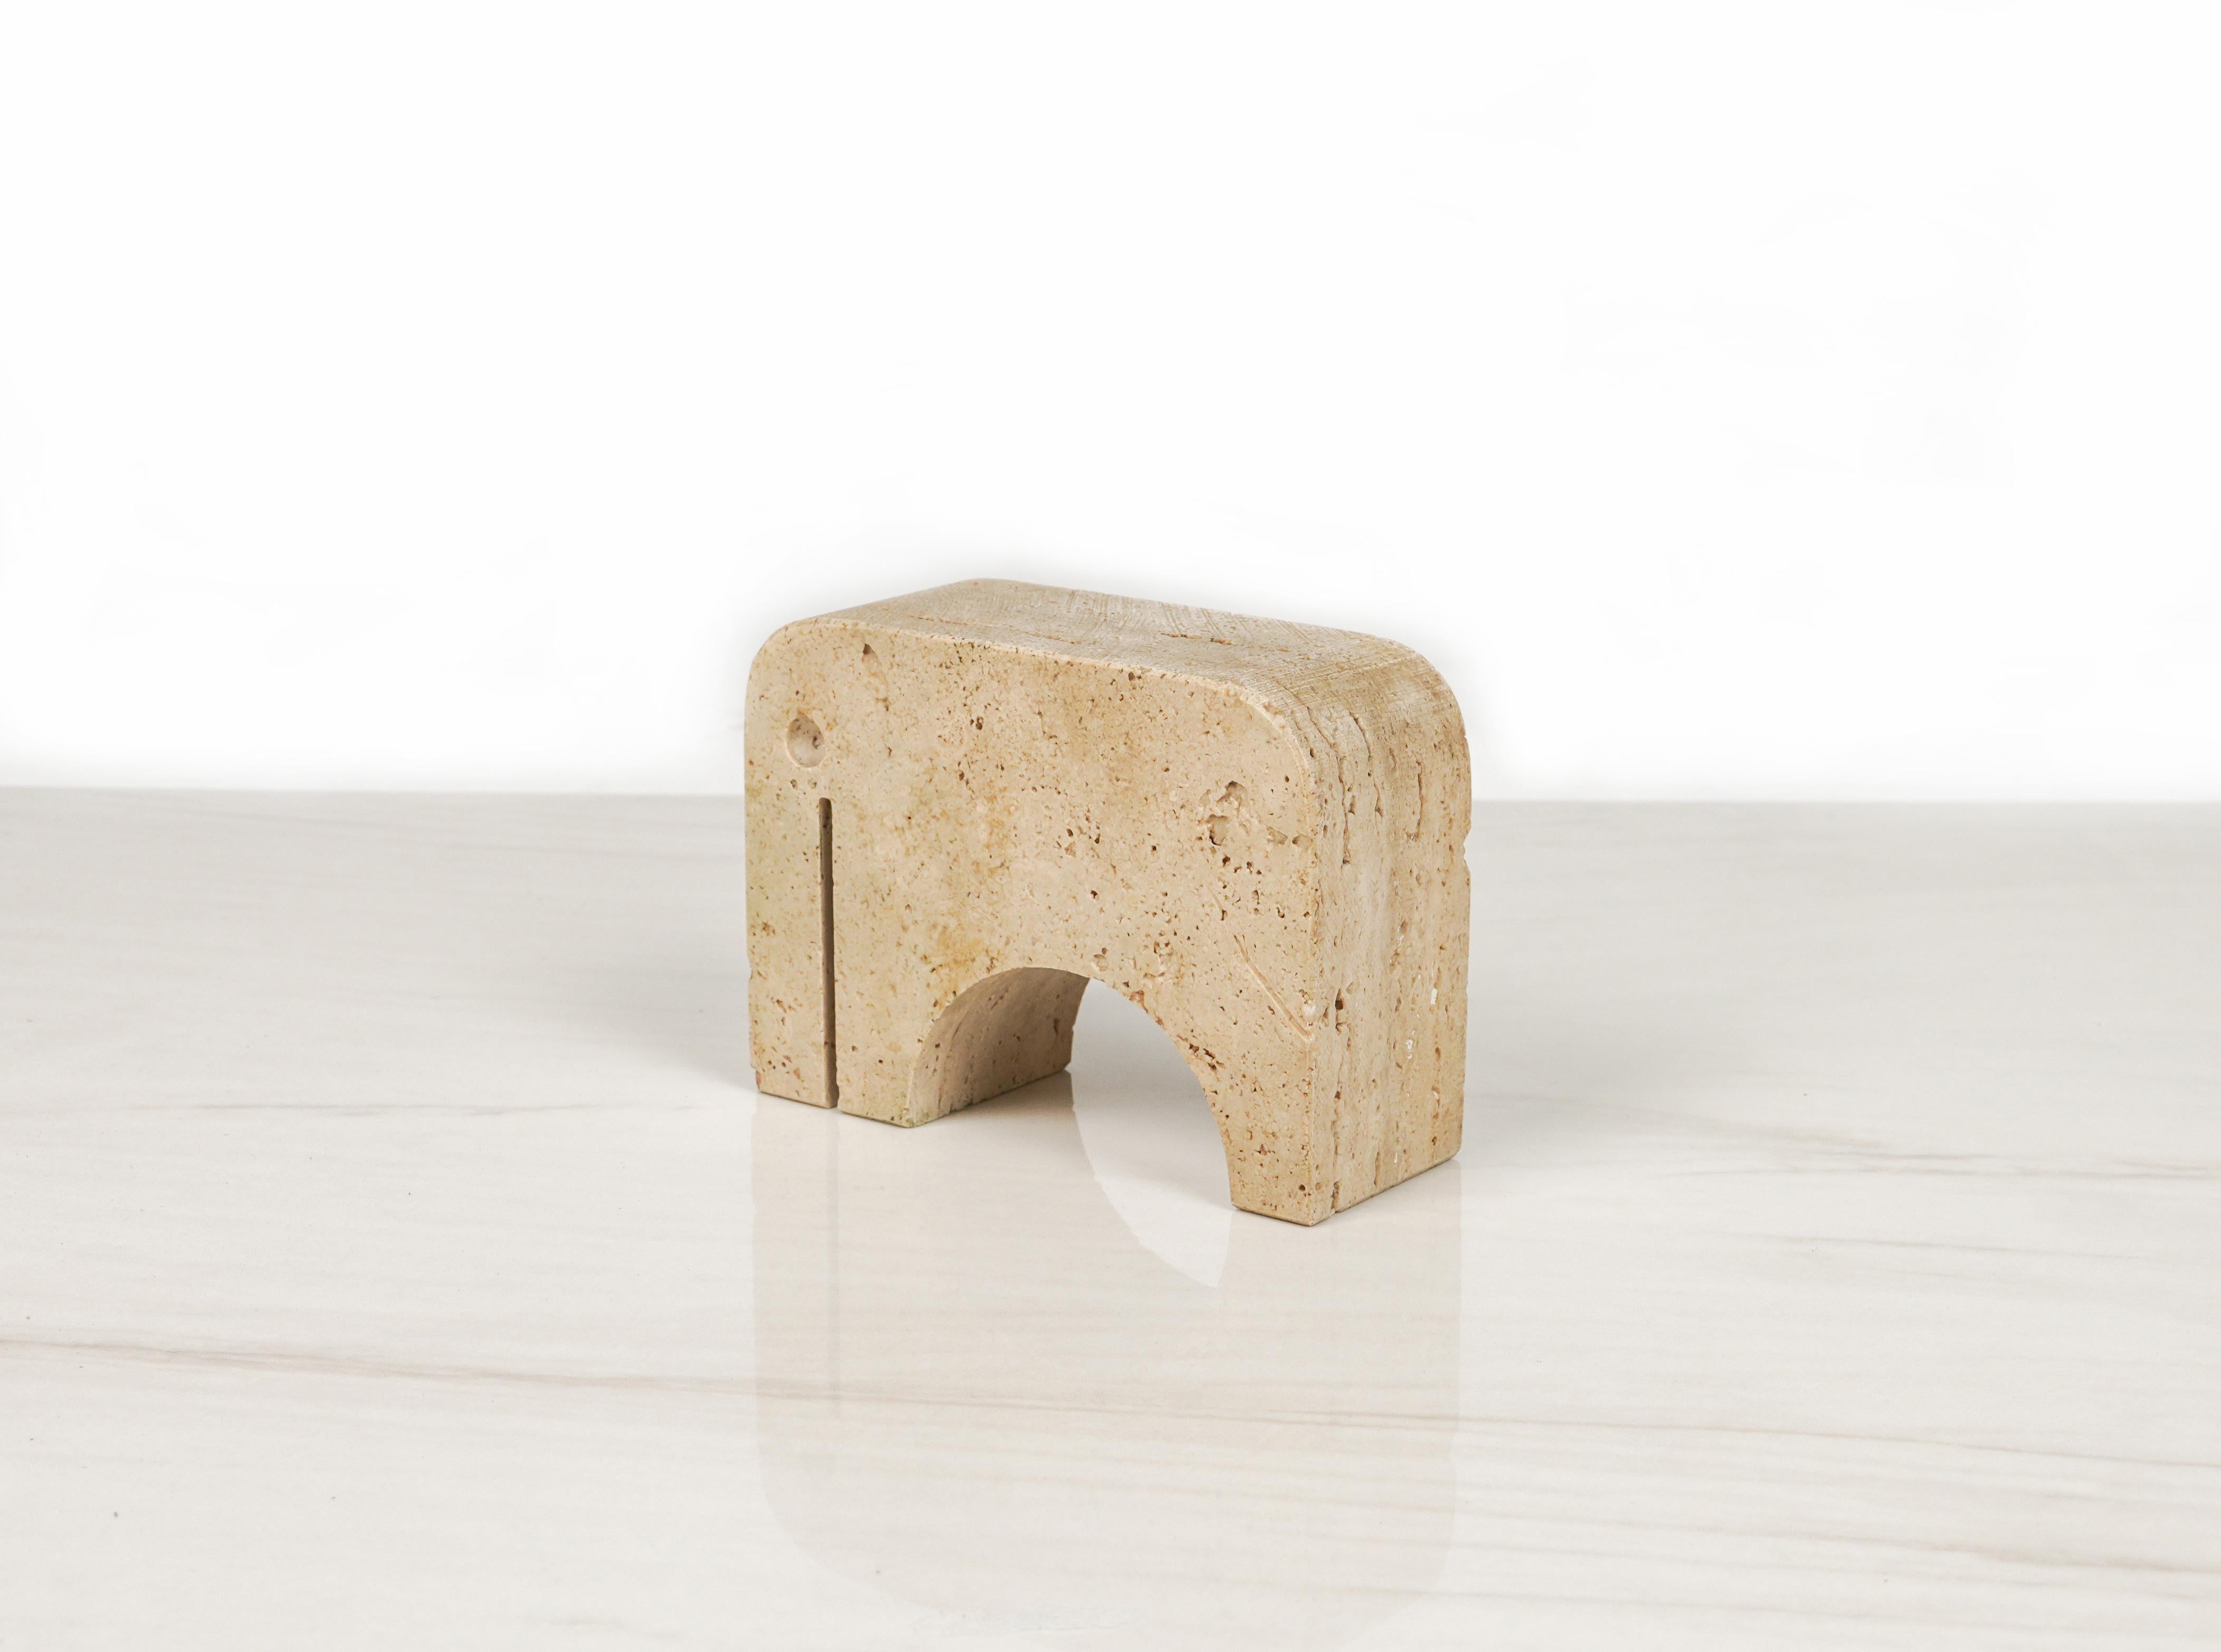 Travertine Elephant Sculpture / Bookend by Fratelli Mannelli, Italy 1970s For Sale 5